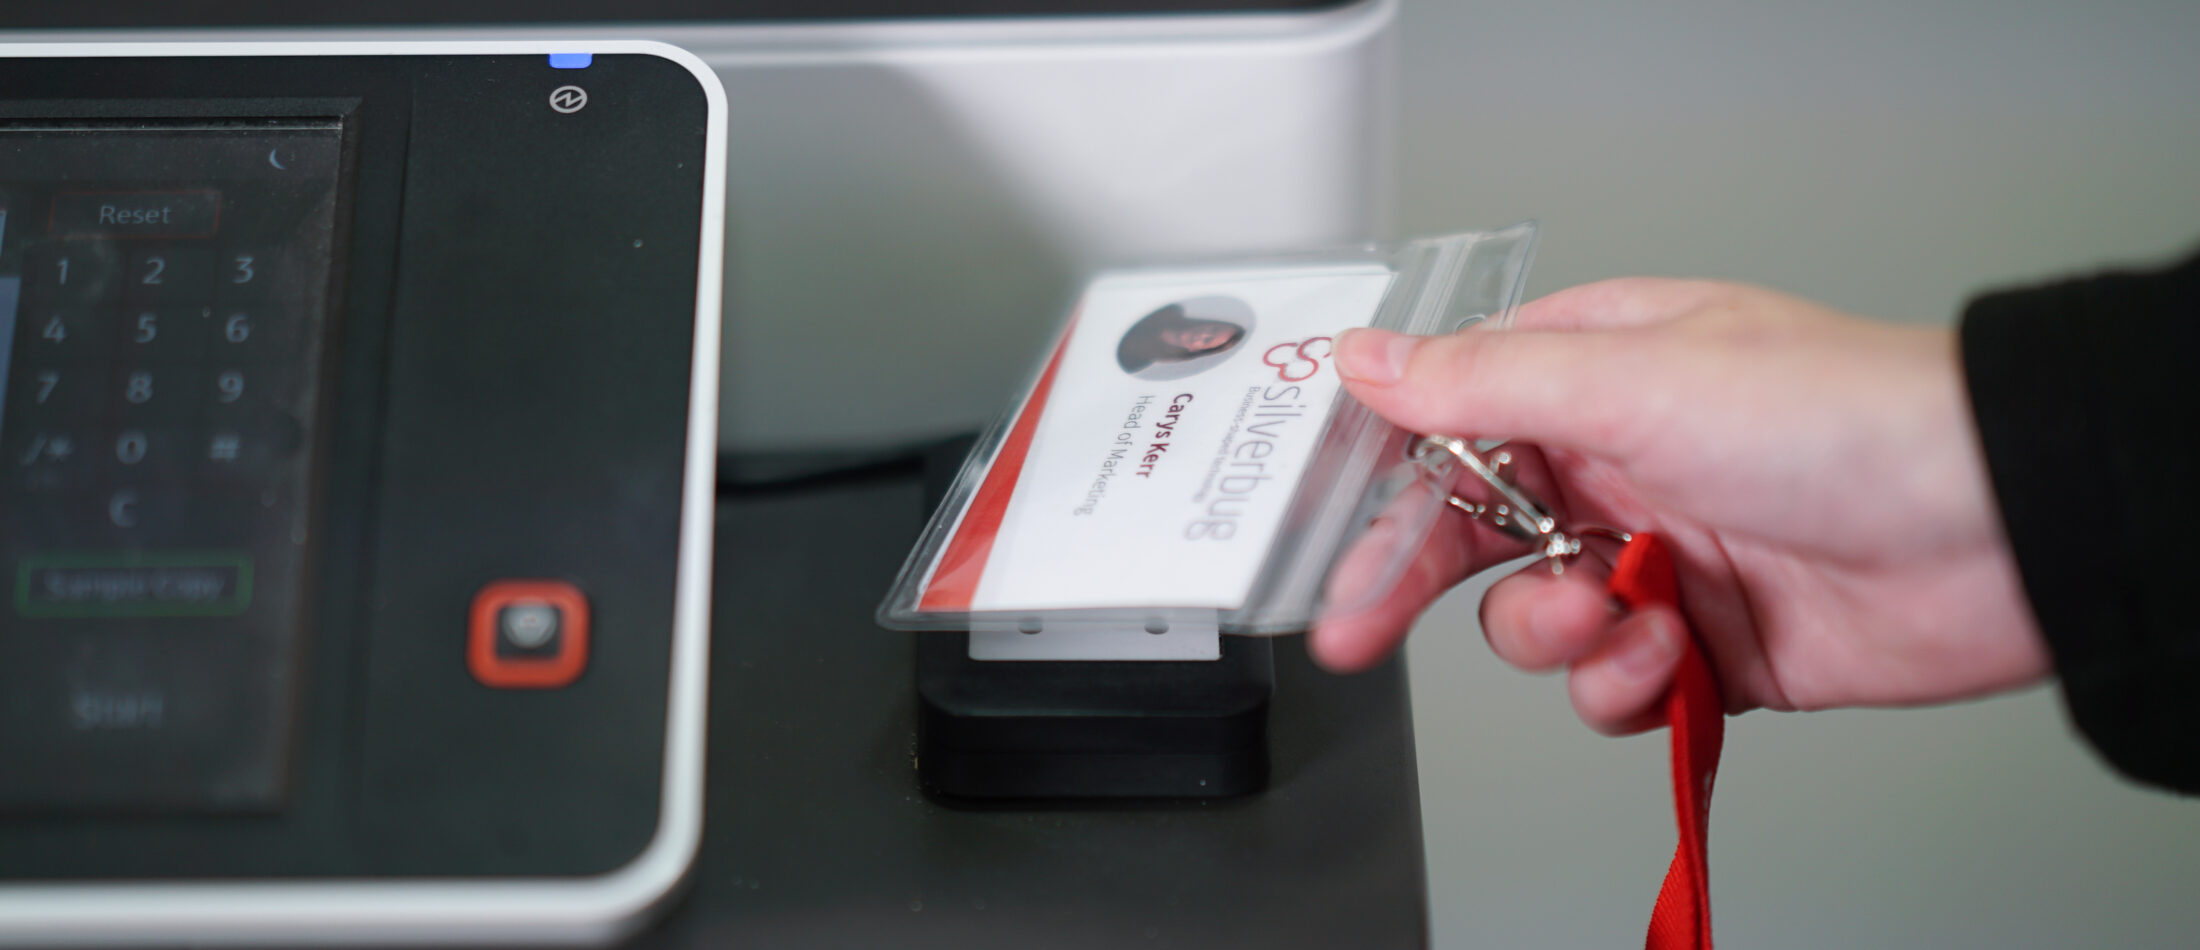 ID badge being scanned on a printer